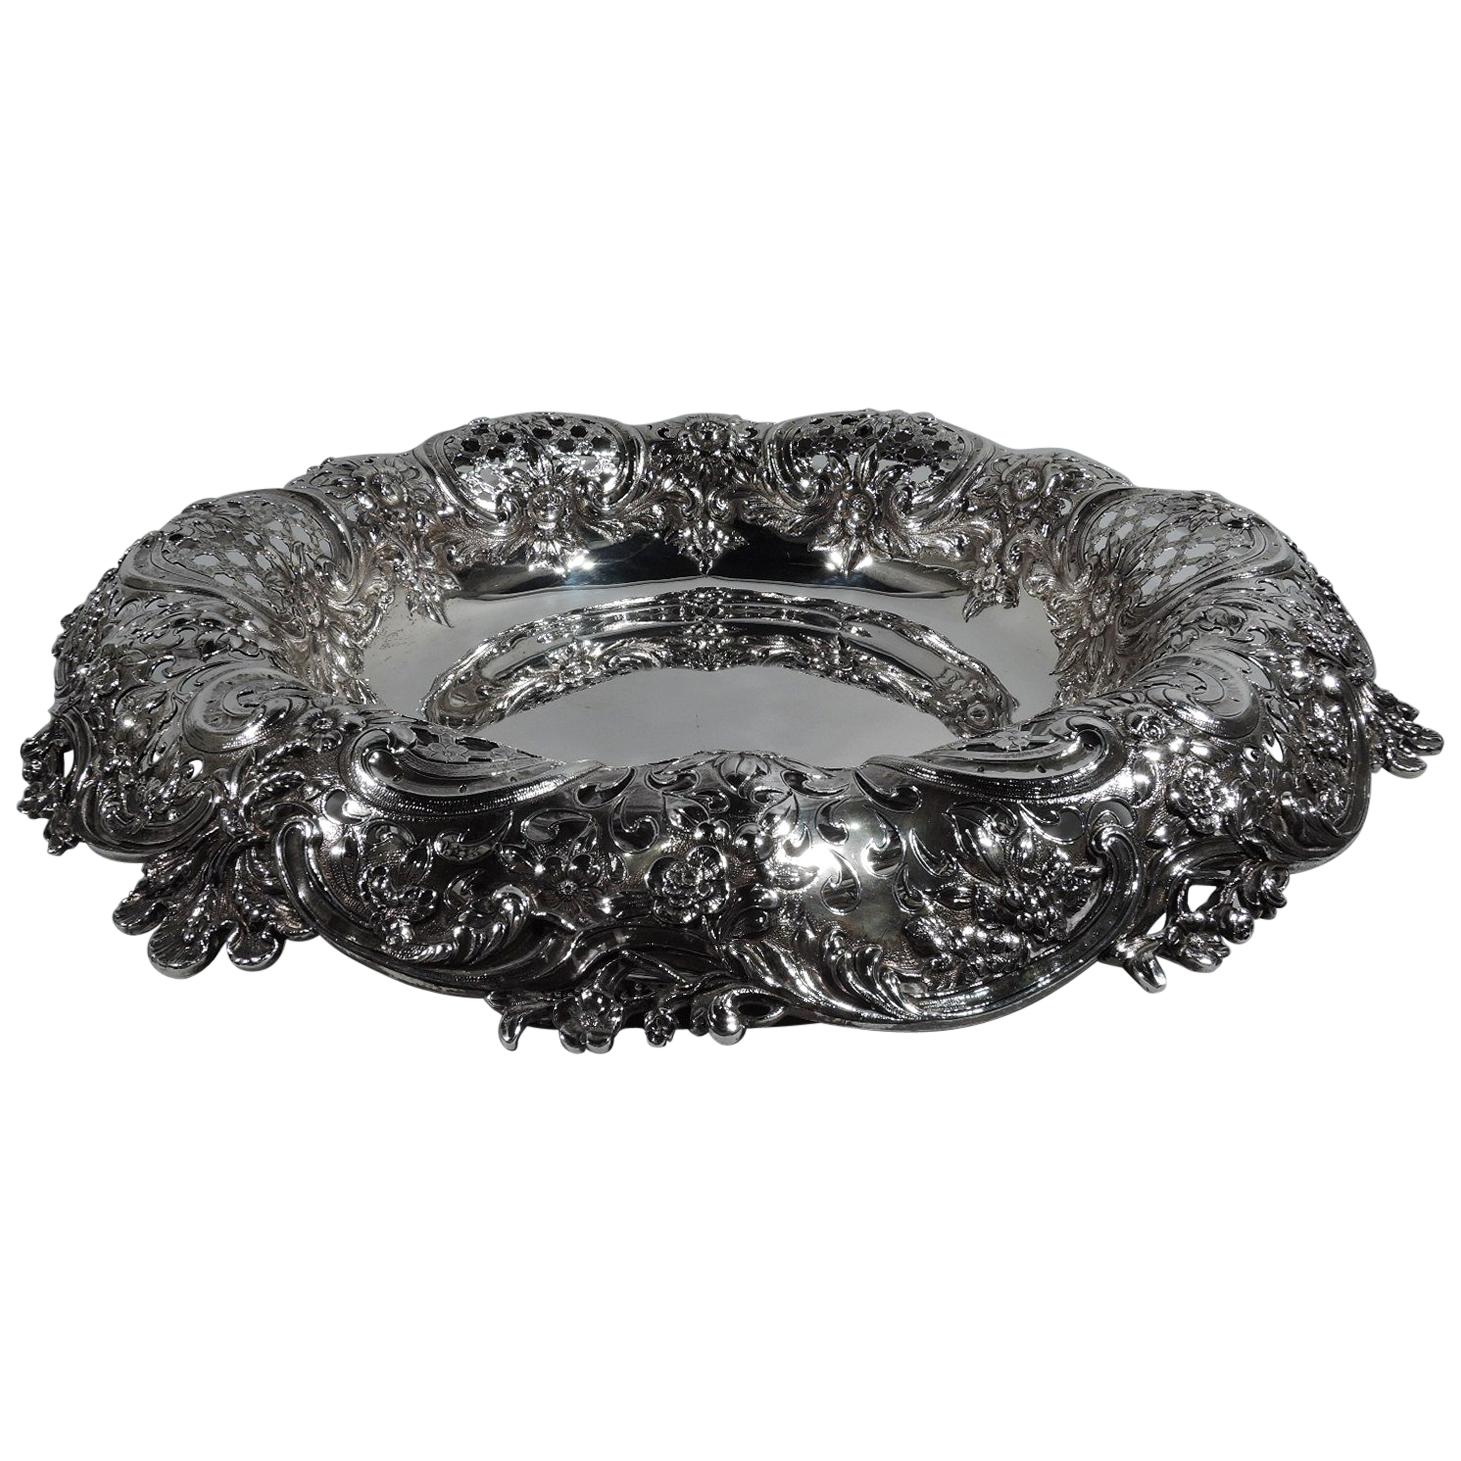 Very Heavy and Wonderfully Sumptuous Sterling Silver Centerpiece Bowl by Tiffany